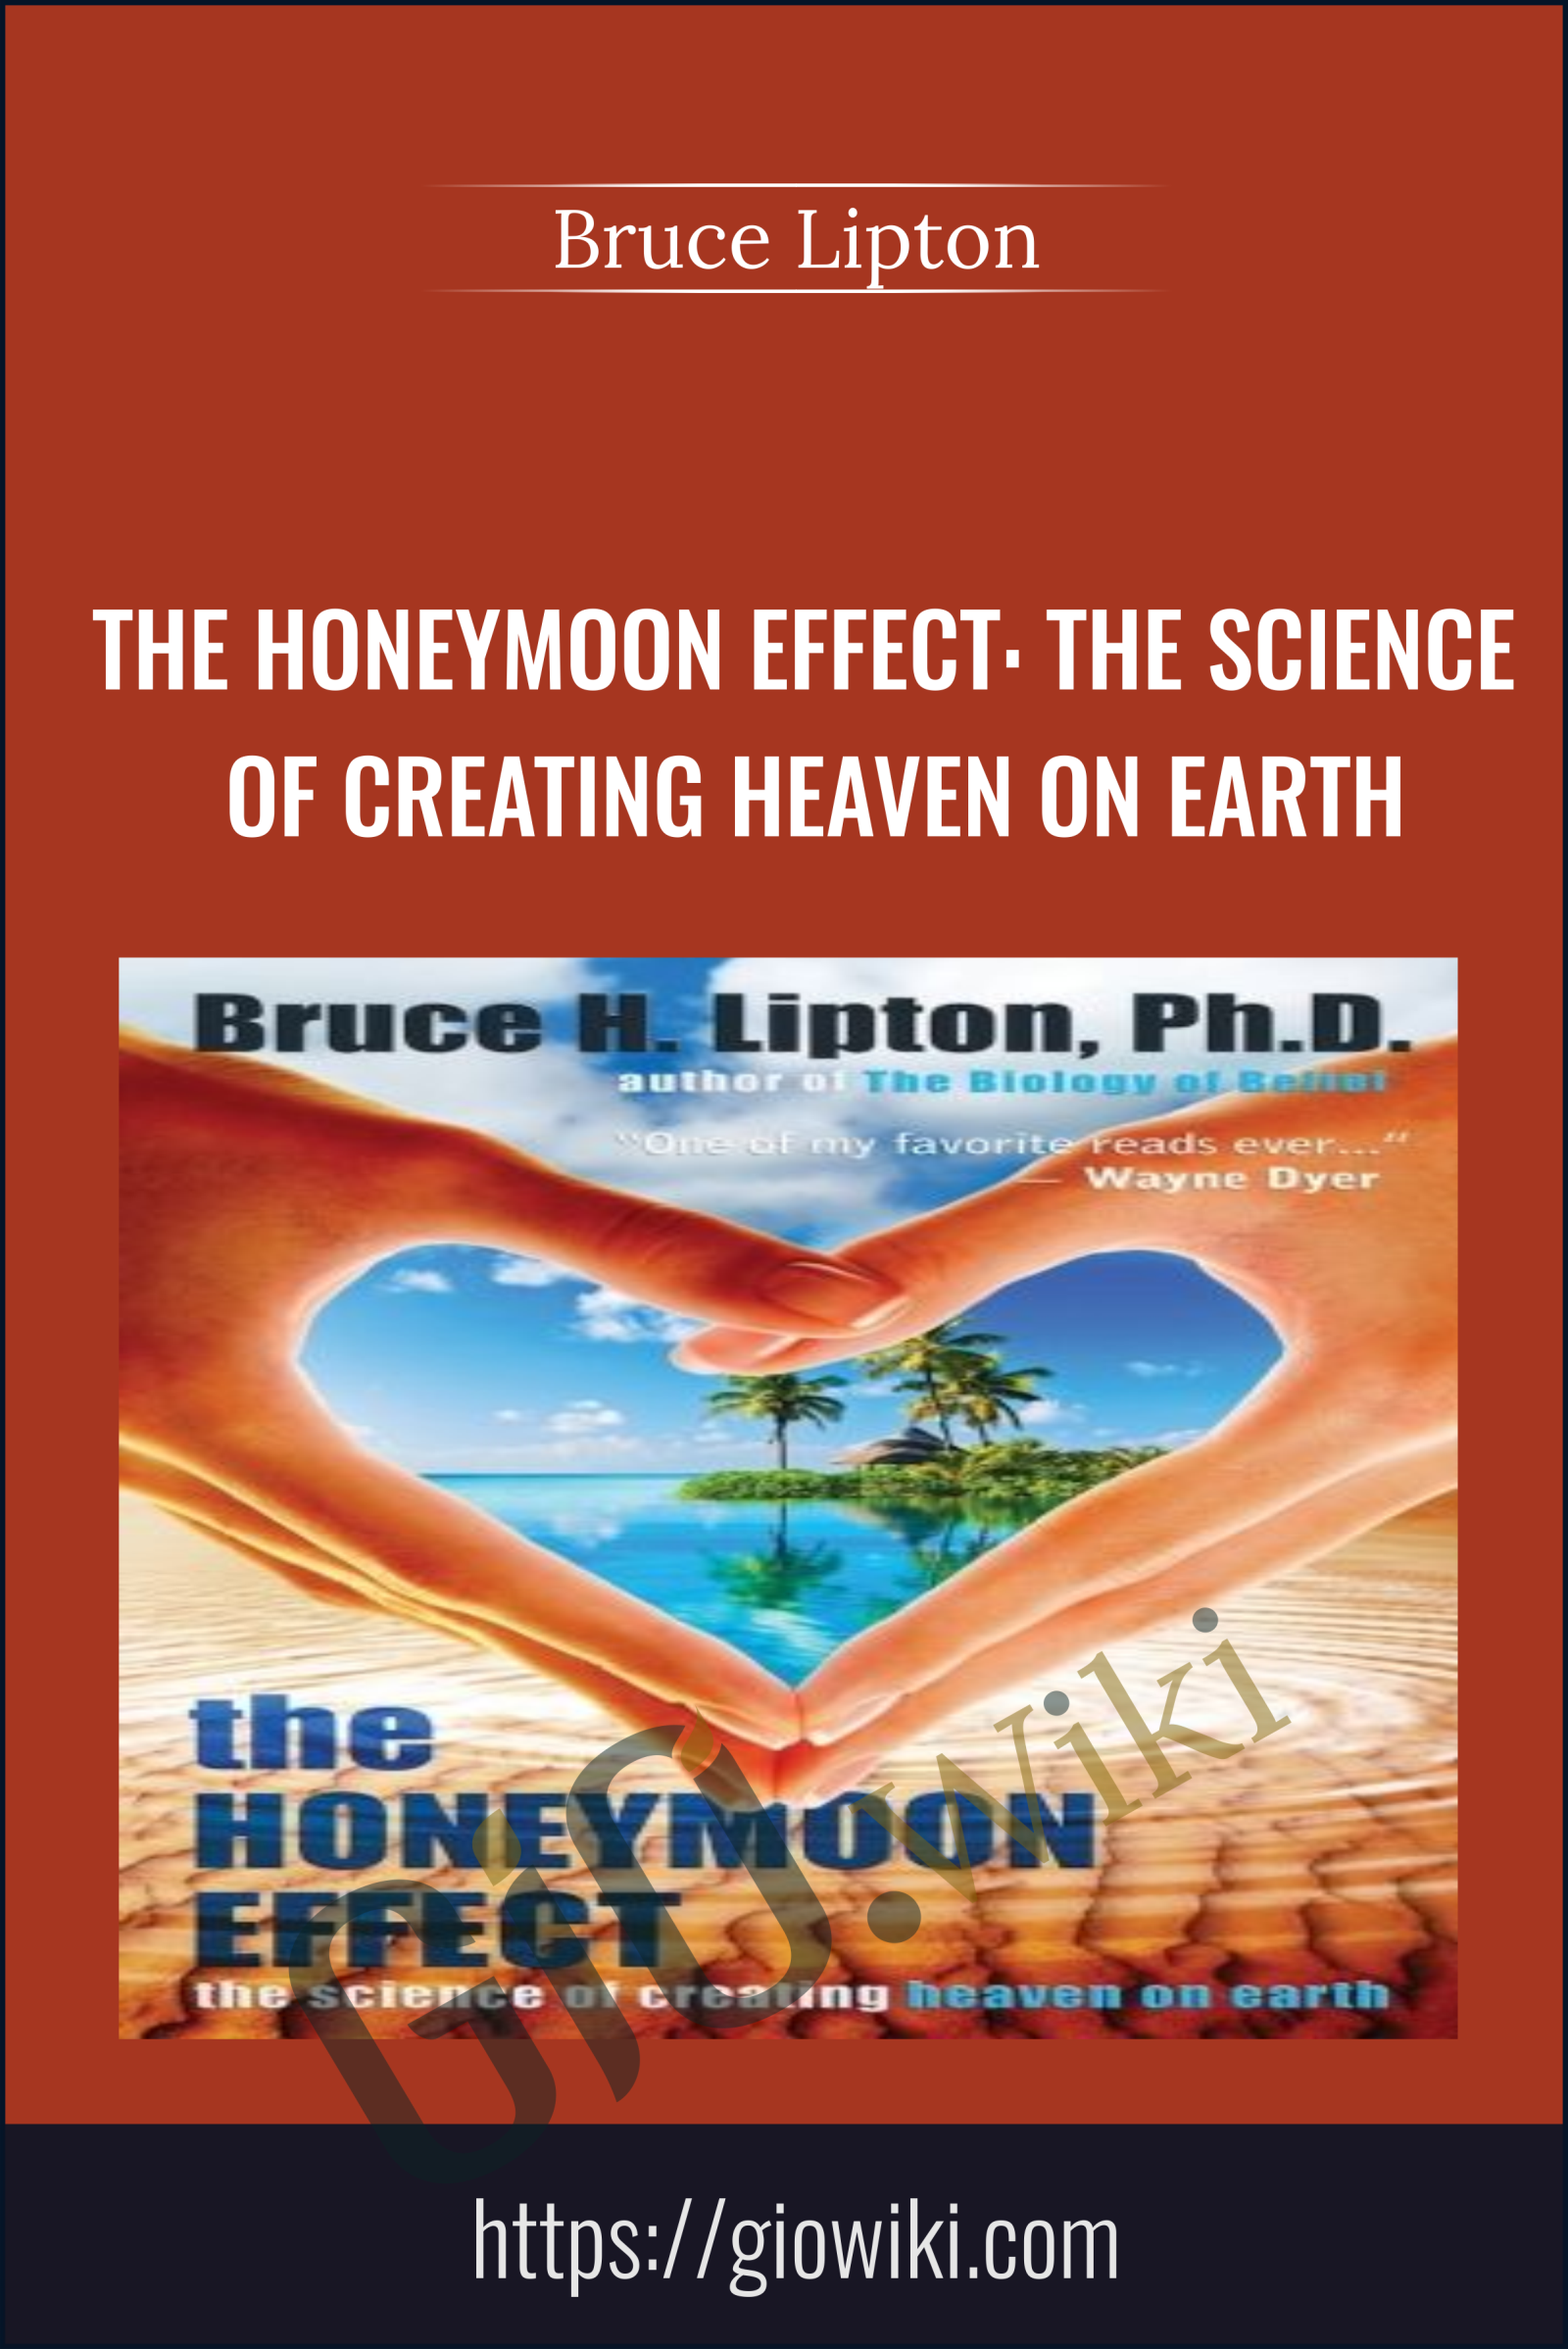 The Honeymoon Effect: The Science of Creating Heaven on Earth - Bruce Lipton